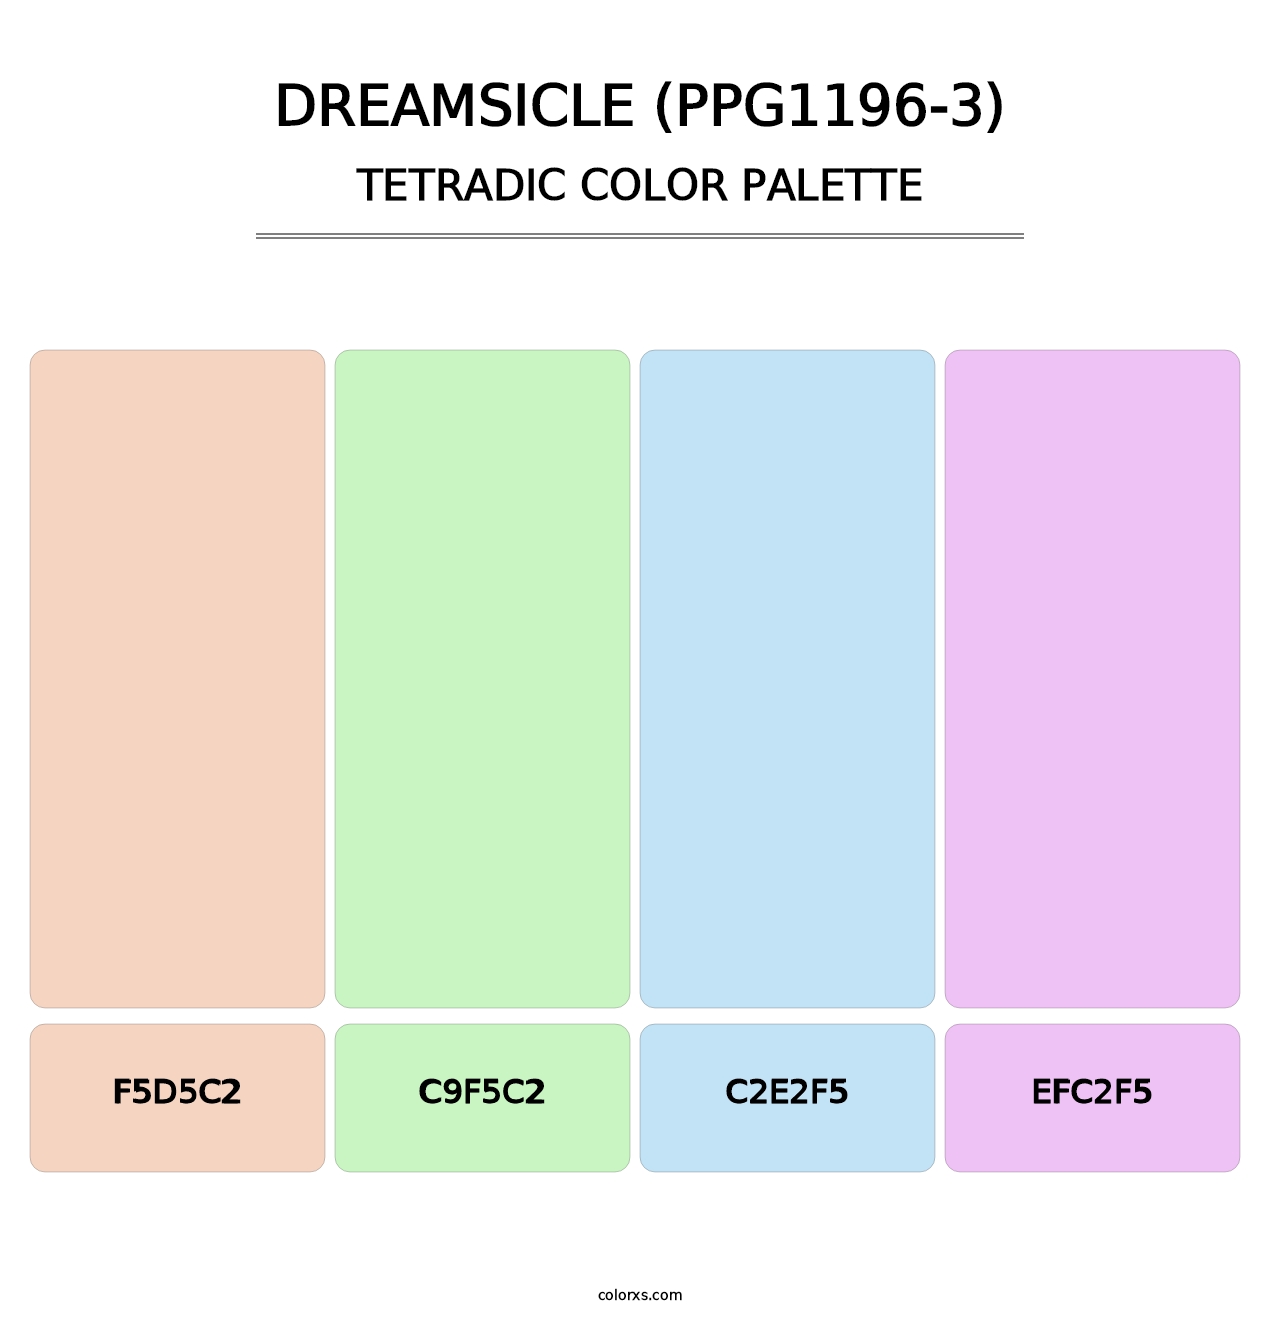 Dreamsicle (PPG1196-3) - Tetradic Color Palette